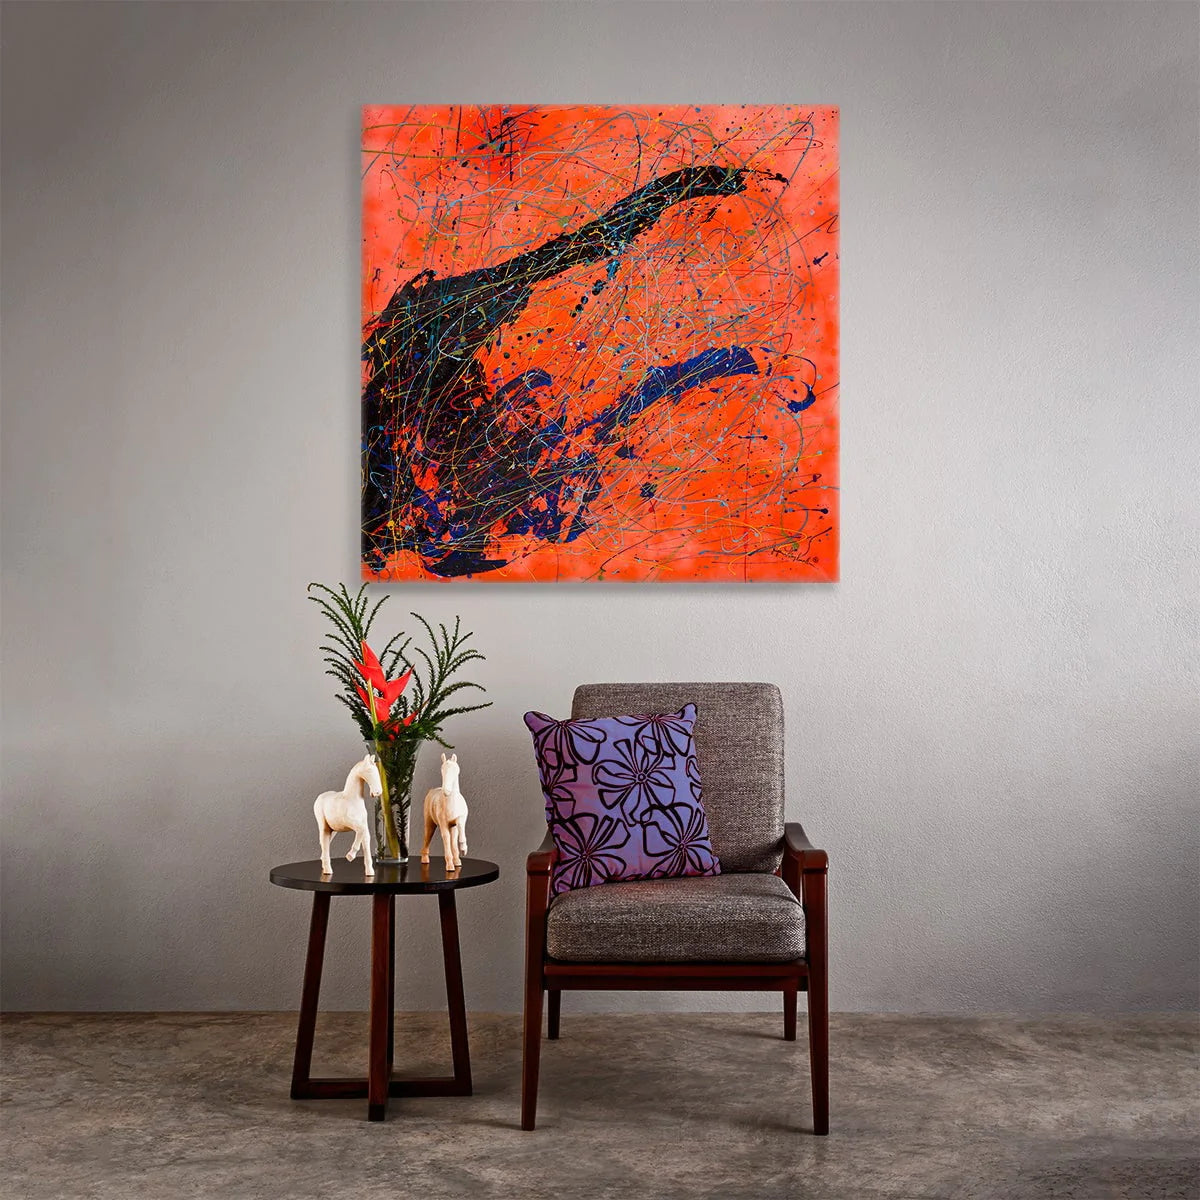 Orange Eclipse (Embellished Limited Edition-Hand Signed by the Artist)